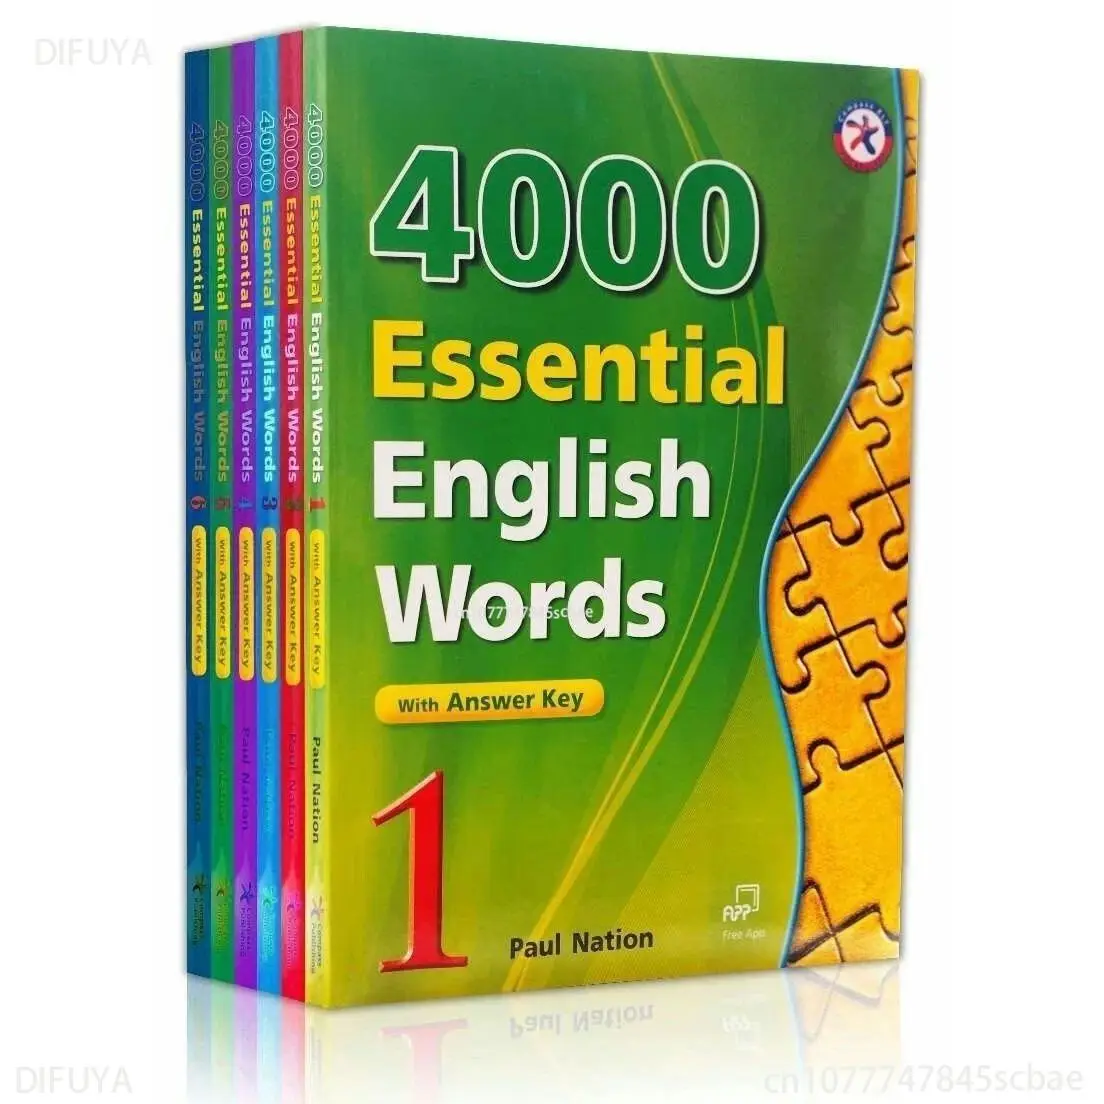 

6 Books/set 4000 Essential English Words Full Color New Version of The English Learning Guide English Book Libros Livros